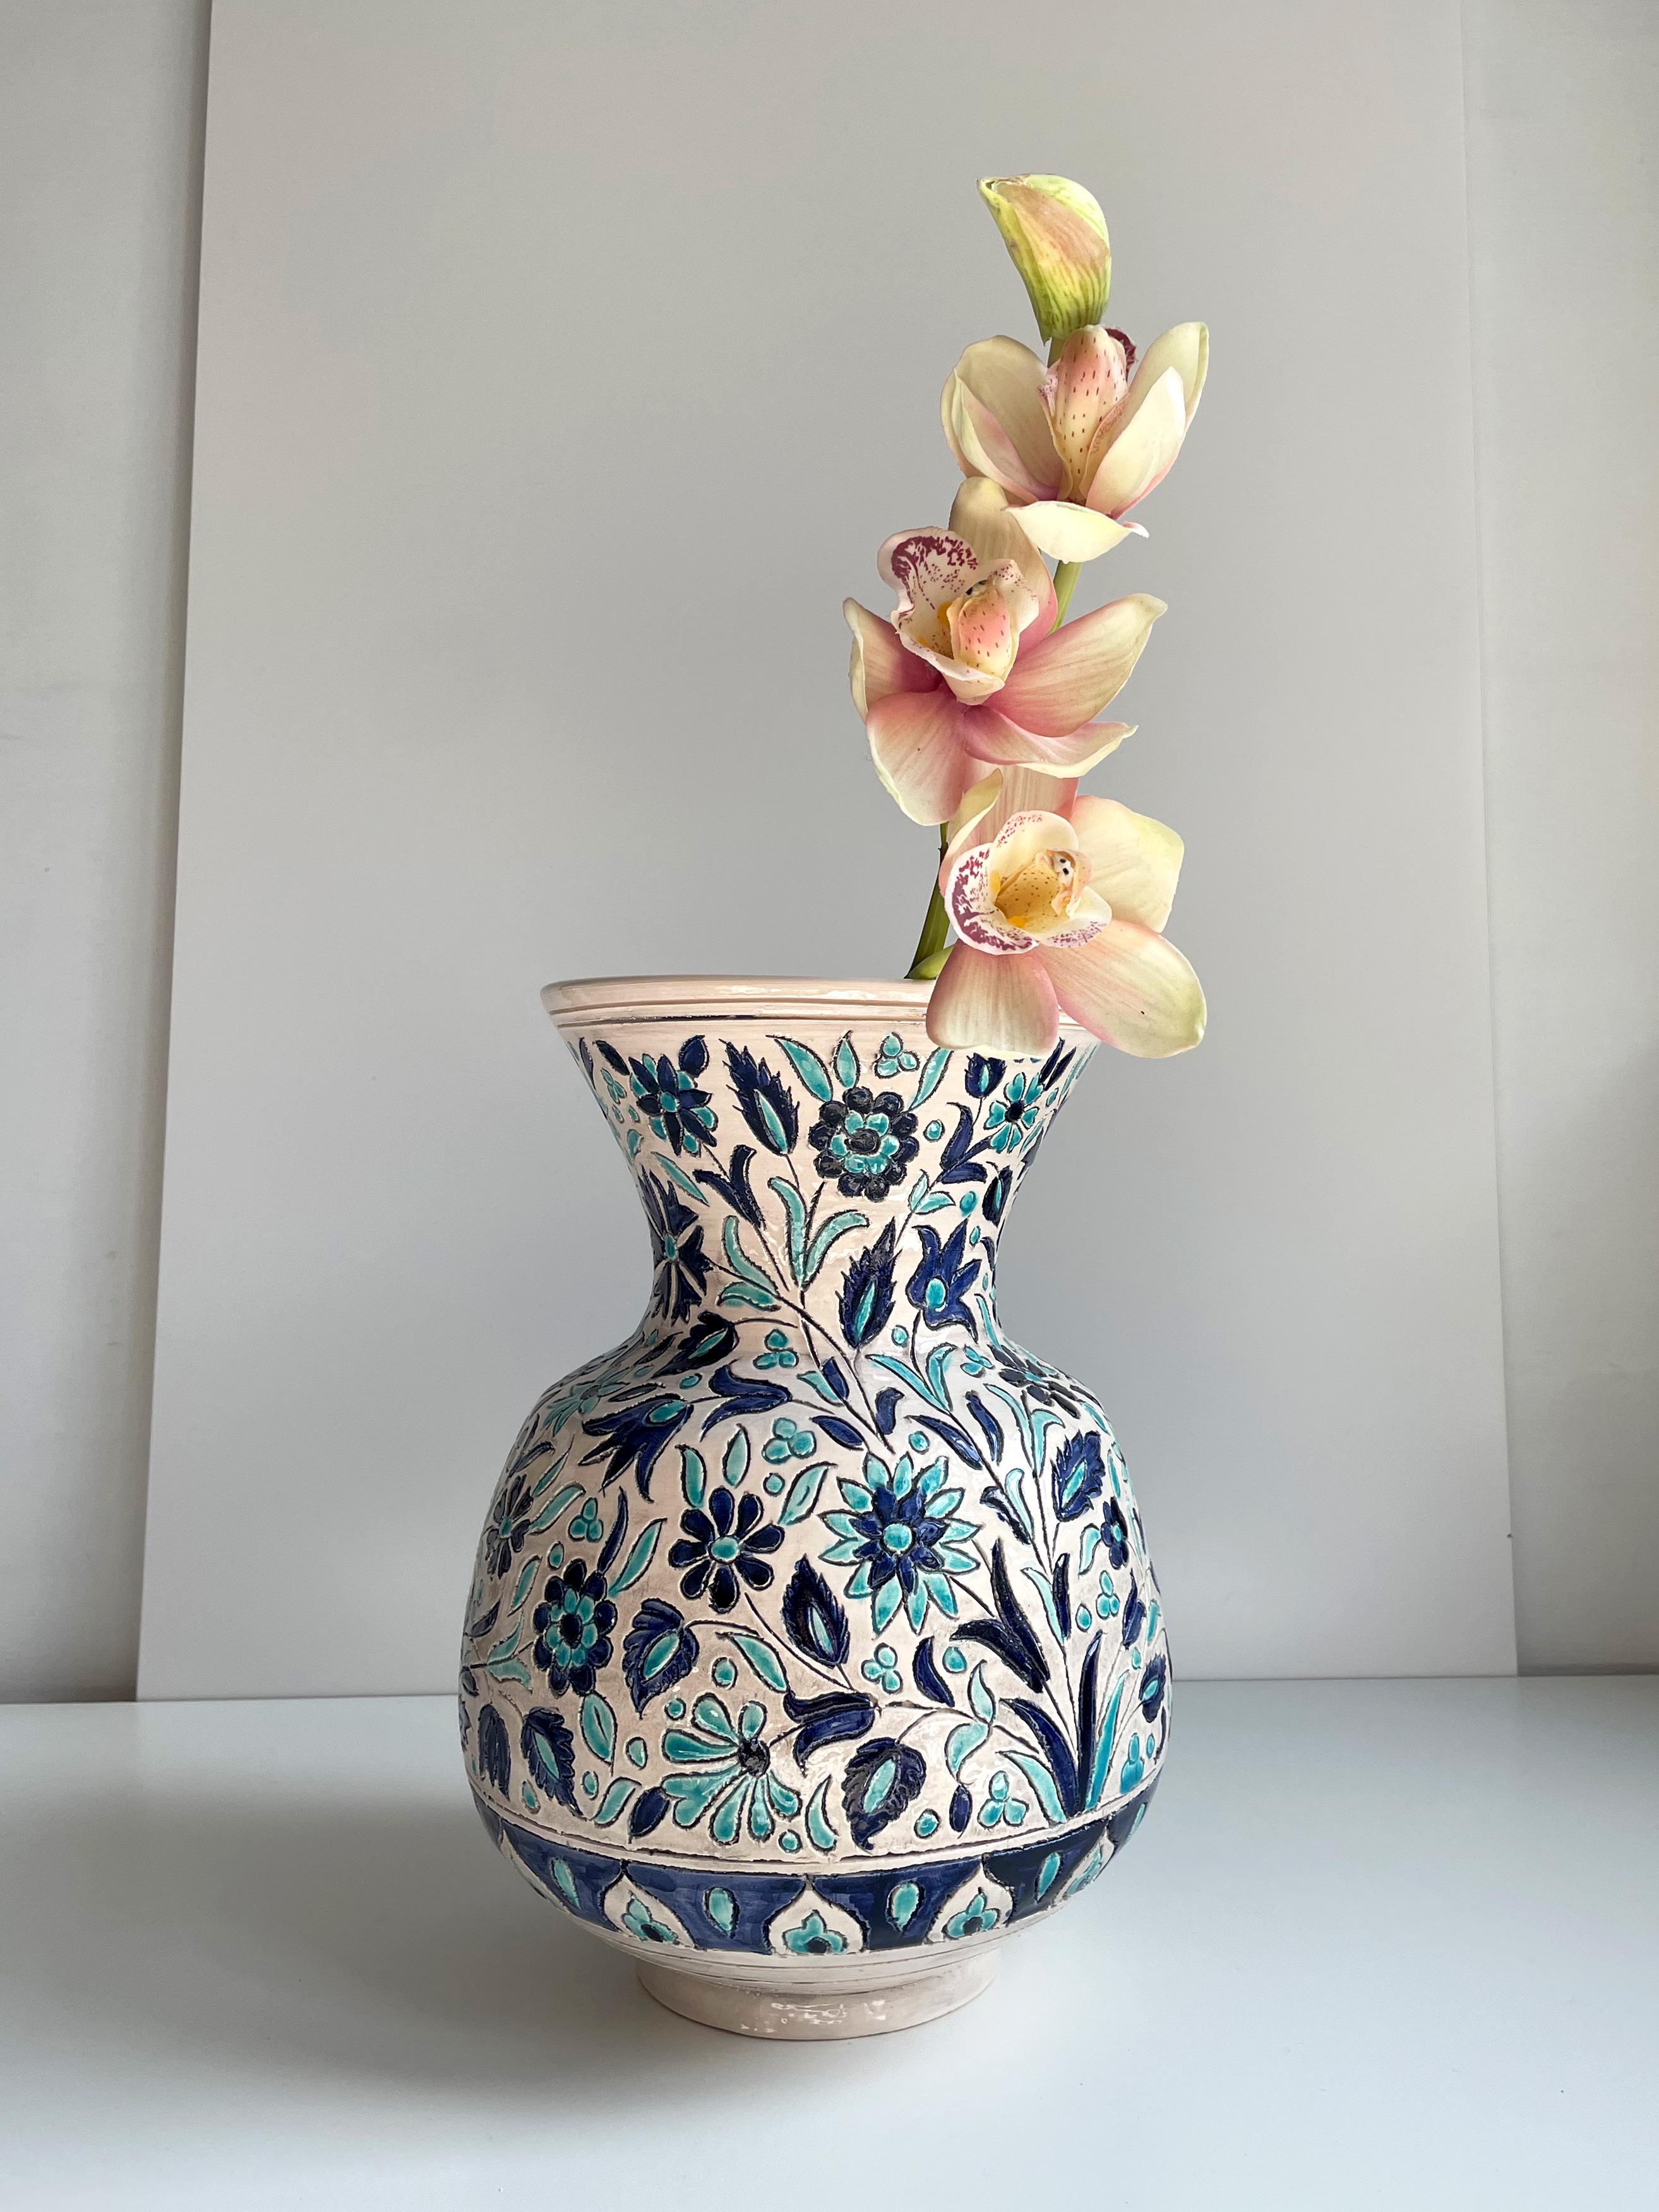 Large handmade vintage Turkish floor vase. Hand-carved stylized floral incisions filled with light and dark blue glaze on the warm white base creating an abundance of different types of flowers and decorations. Signed under base. Beautiful vintage